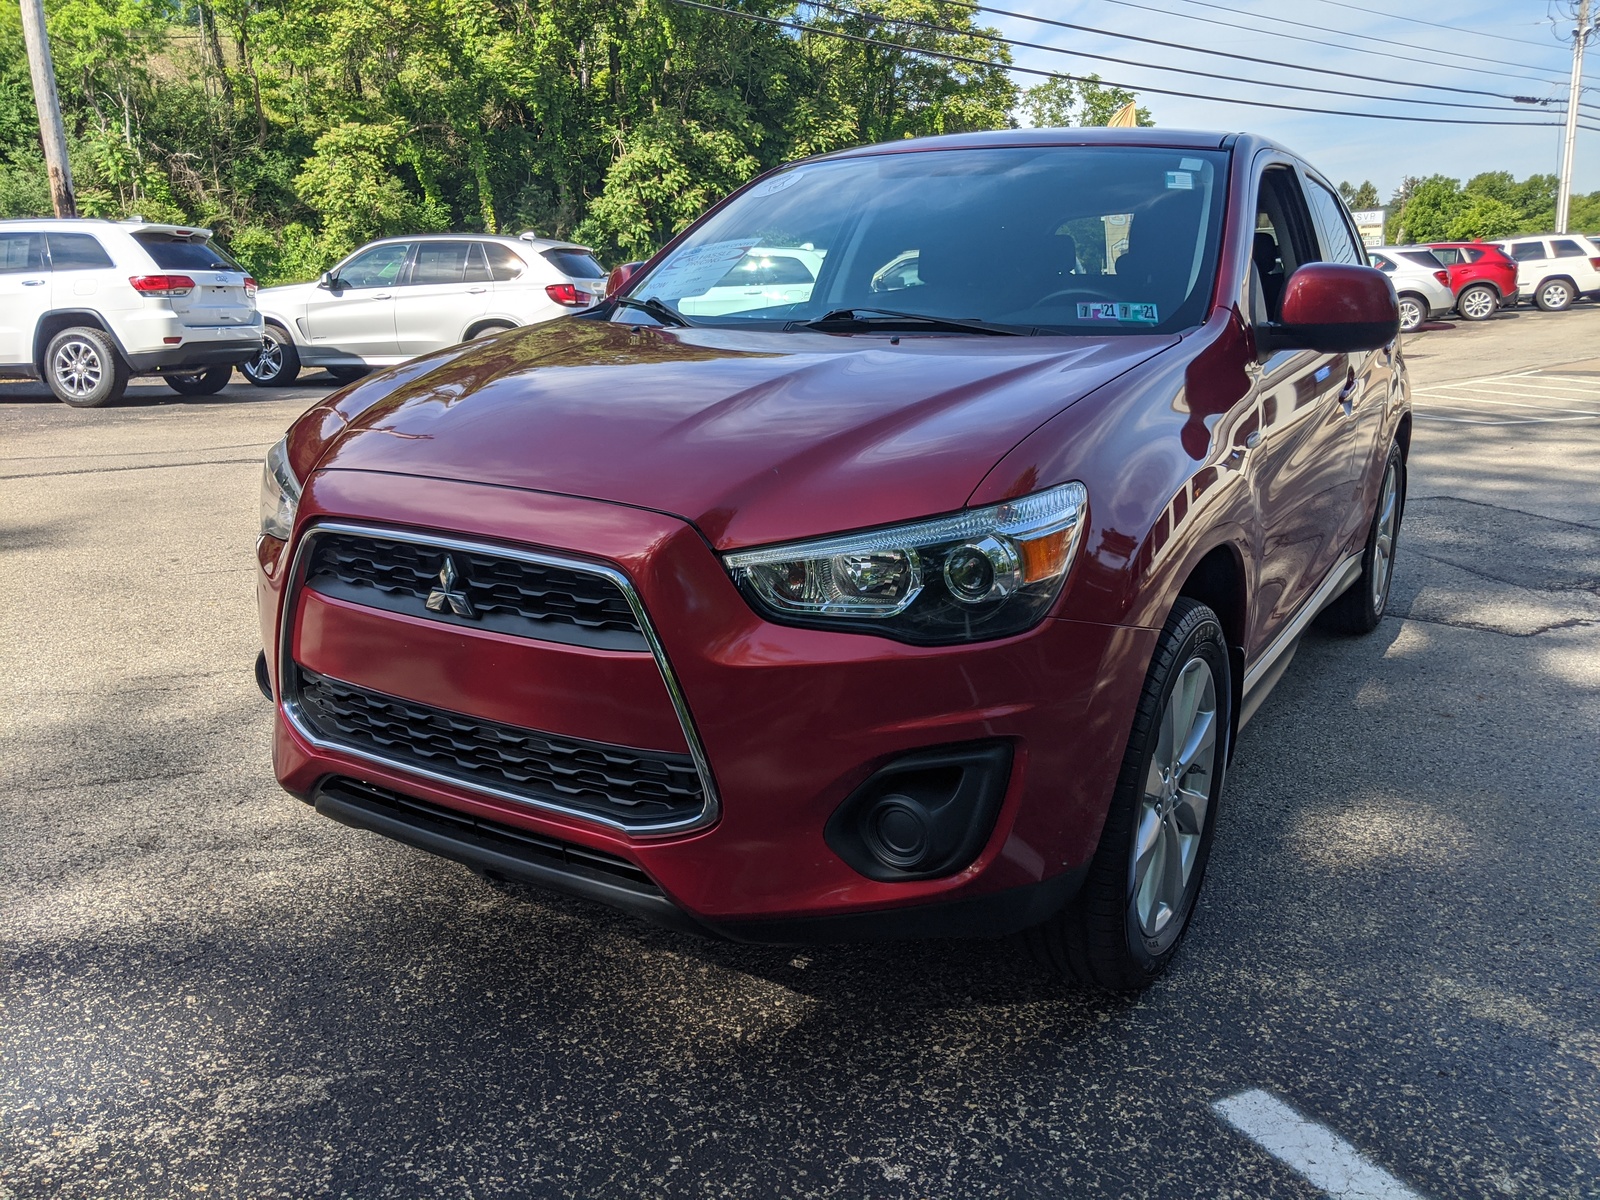 PreOwned 2015 Mitsubishi Outlander Sport ES in Rally Red